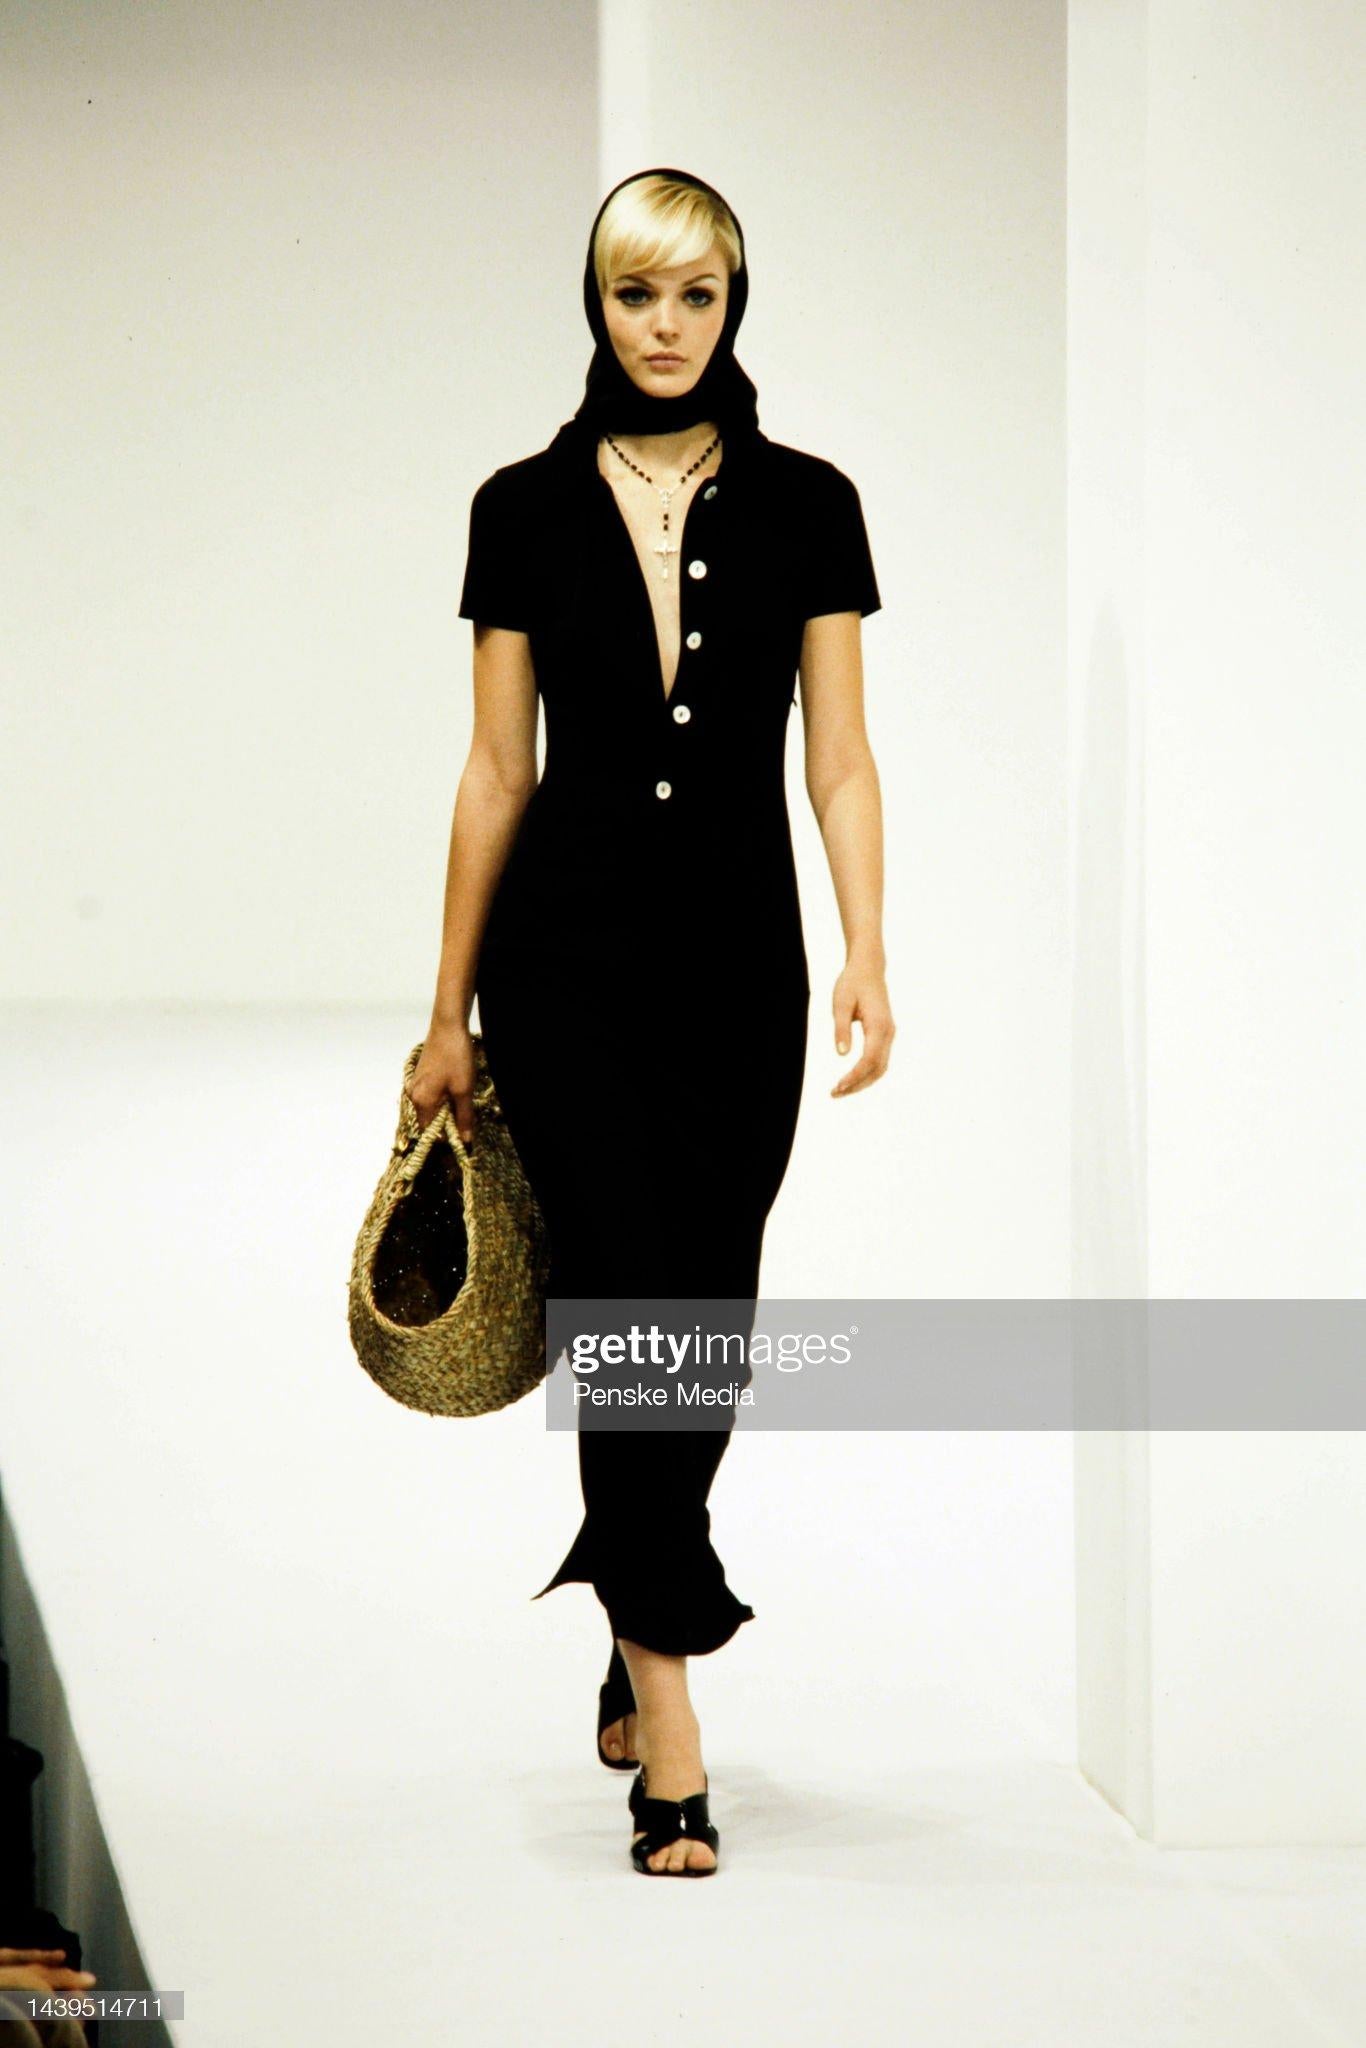 Presenting a stunning black Dolce & Gabbana short sleeve collared gown. From the Spring/Summer 1996 collection, this chic dress debuted on the season's runway. This refined dress features short sleeves and a fold-over collar. The dress is defined by